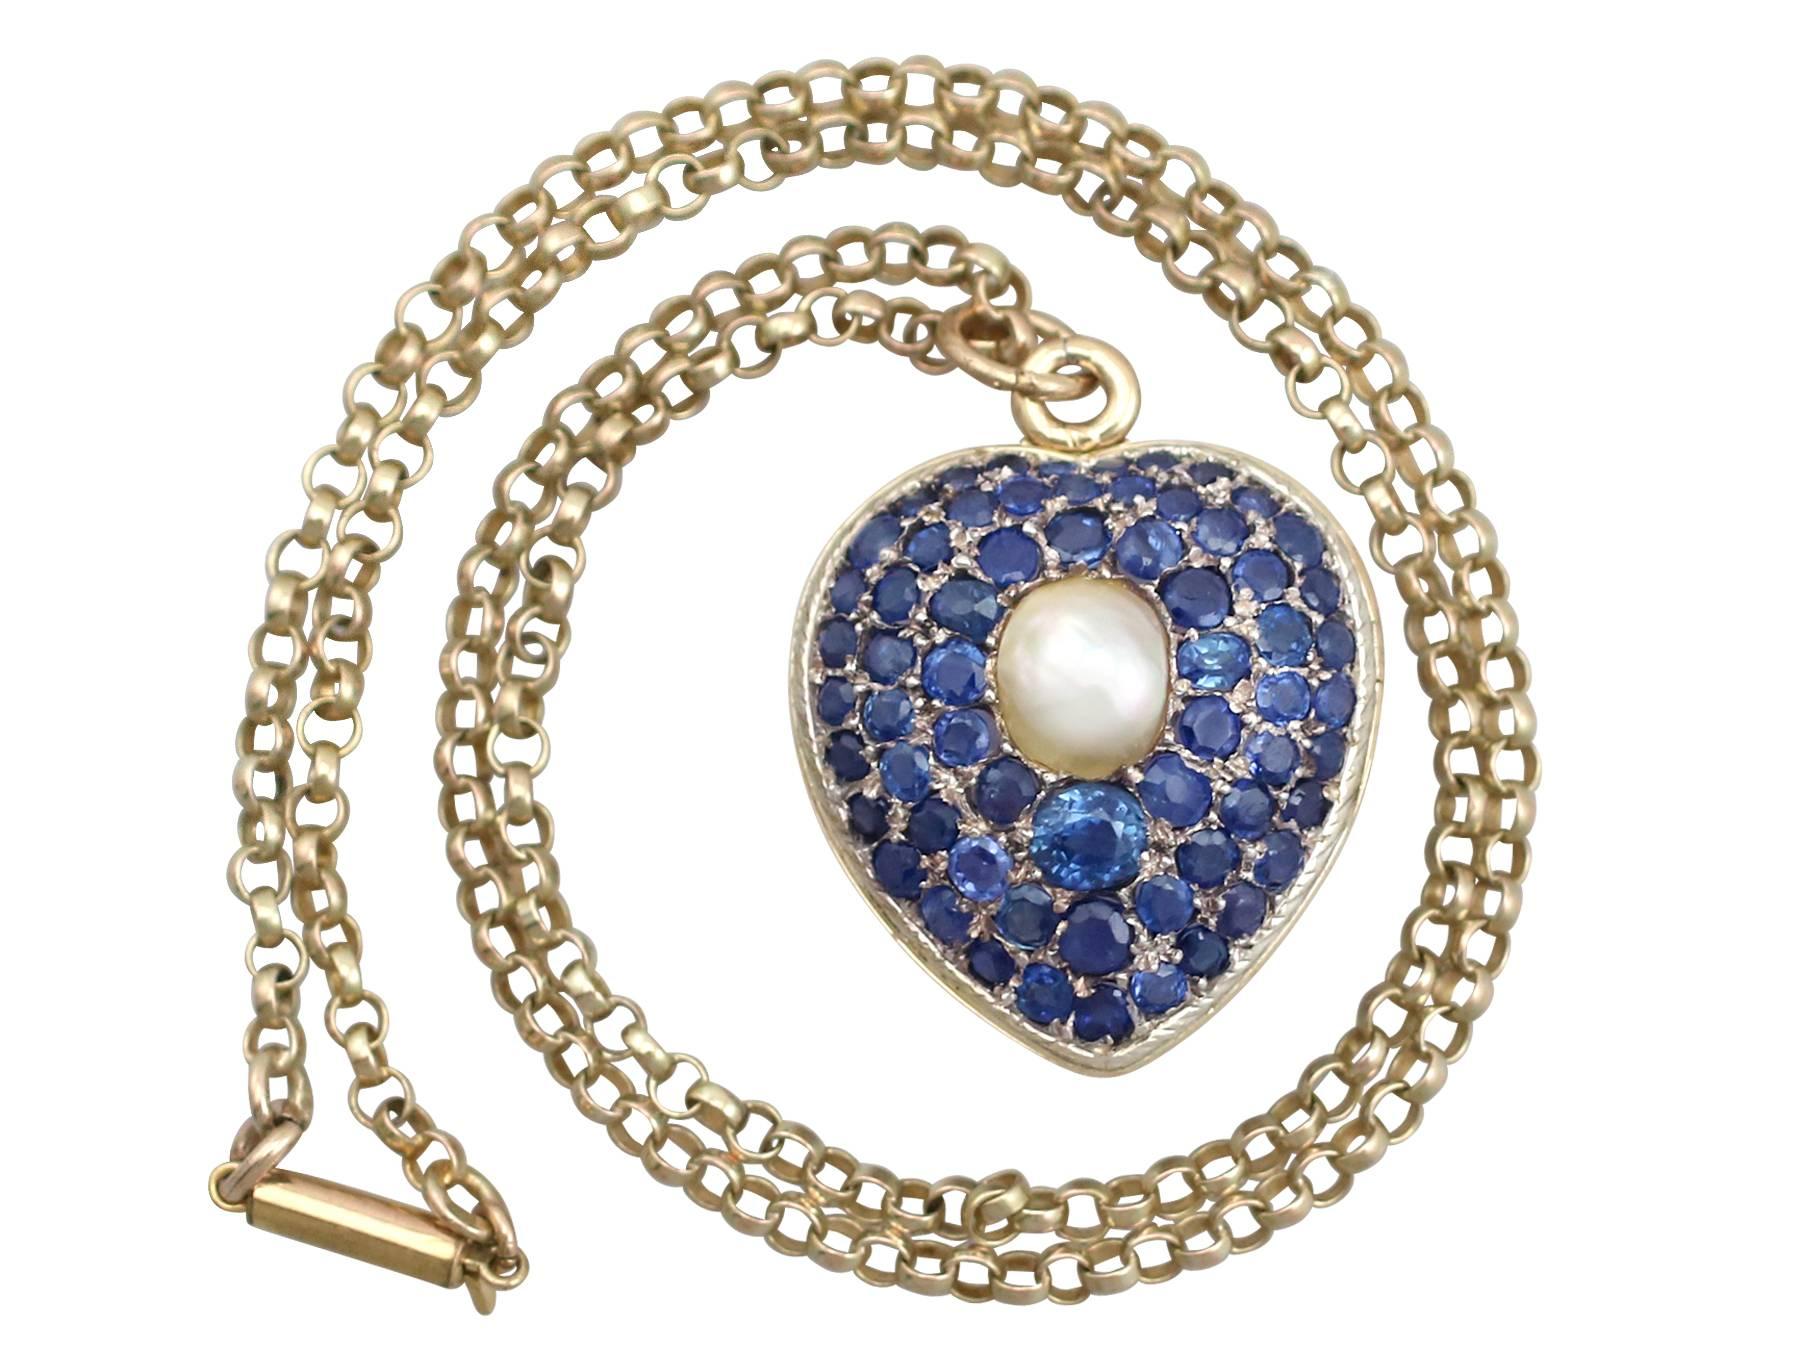 A stunning Victorian natural pearl and 3.49 carat sapphire and 18 carat yellow gold, 18 carat white gold set locket; part of our diverse antique jewellery collections.

This stunning, fine and impressive sapphire heart locket has been crafted in 18